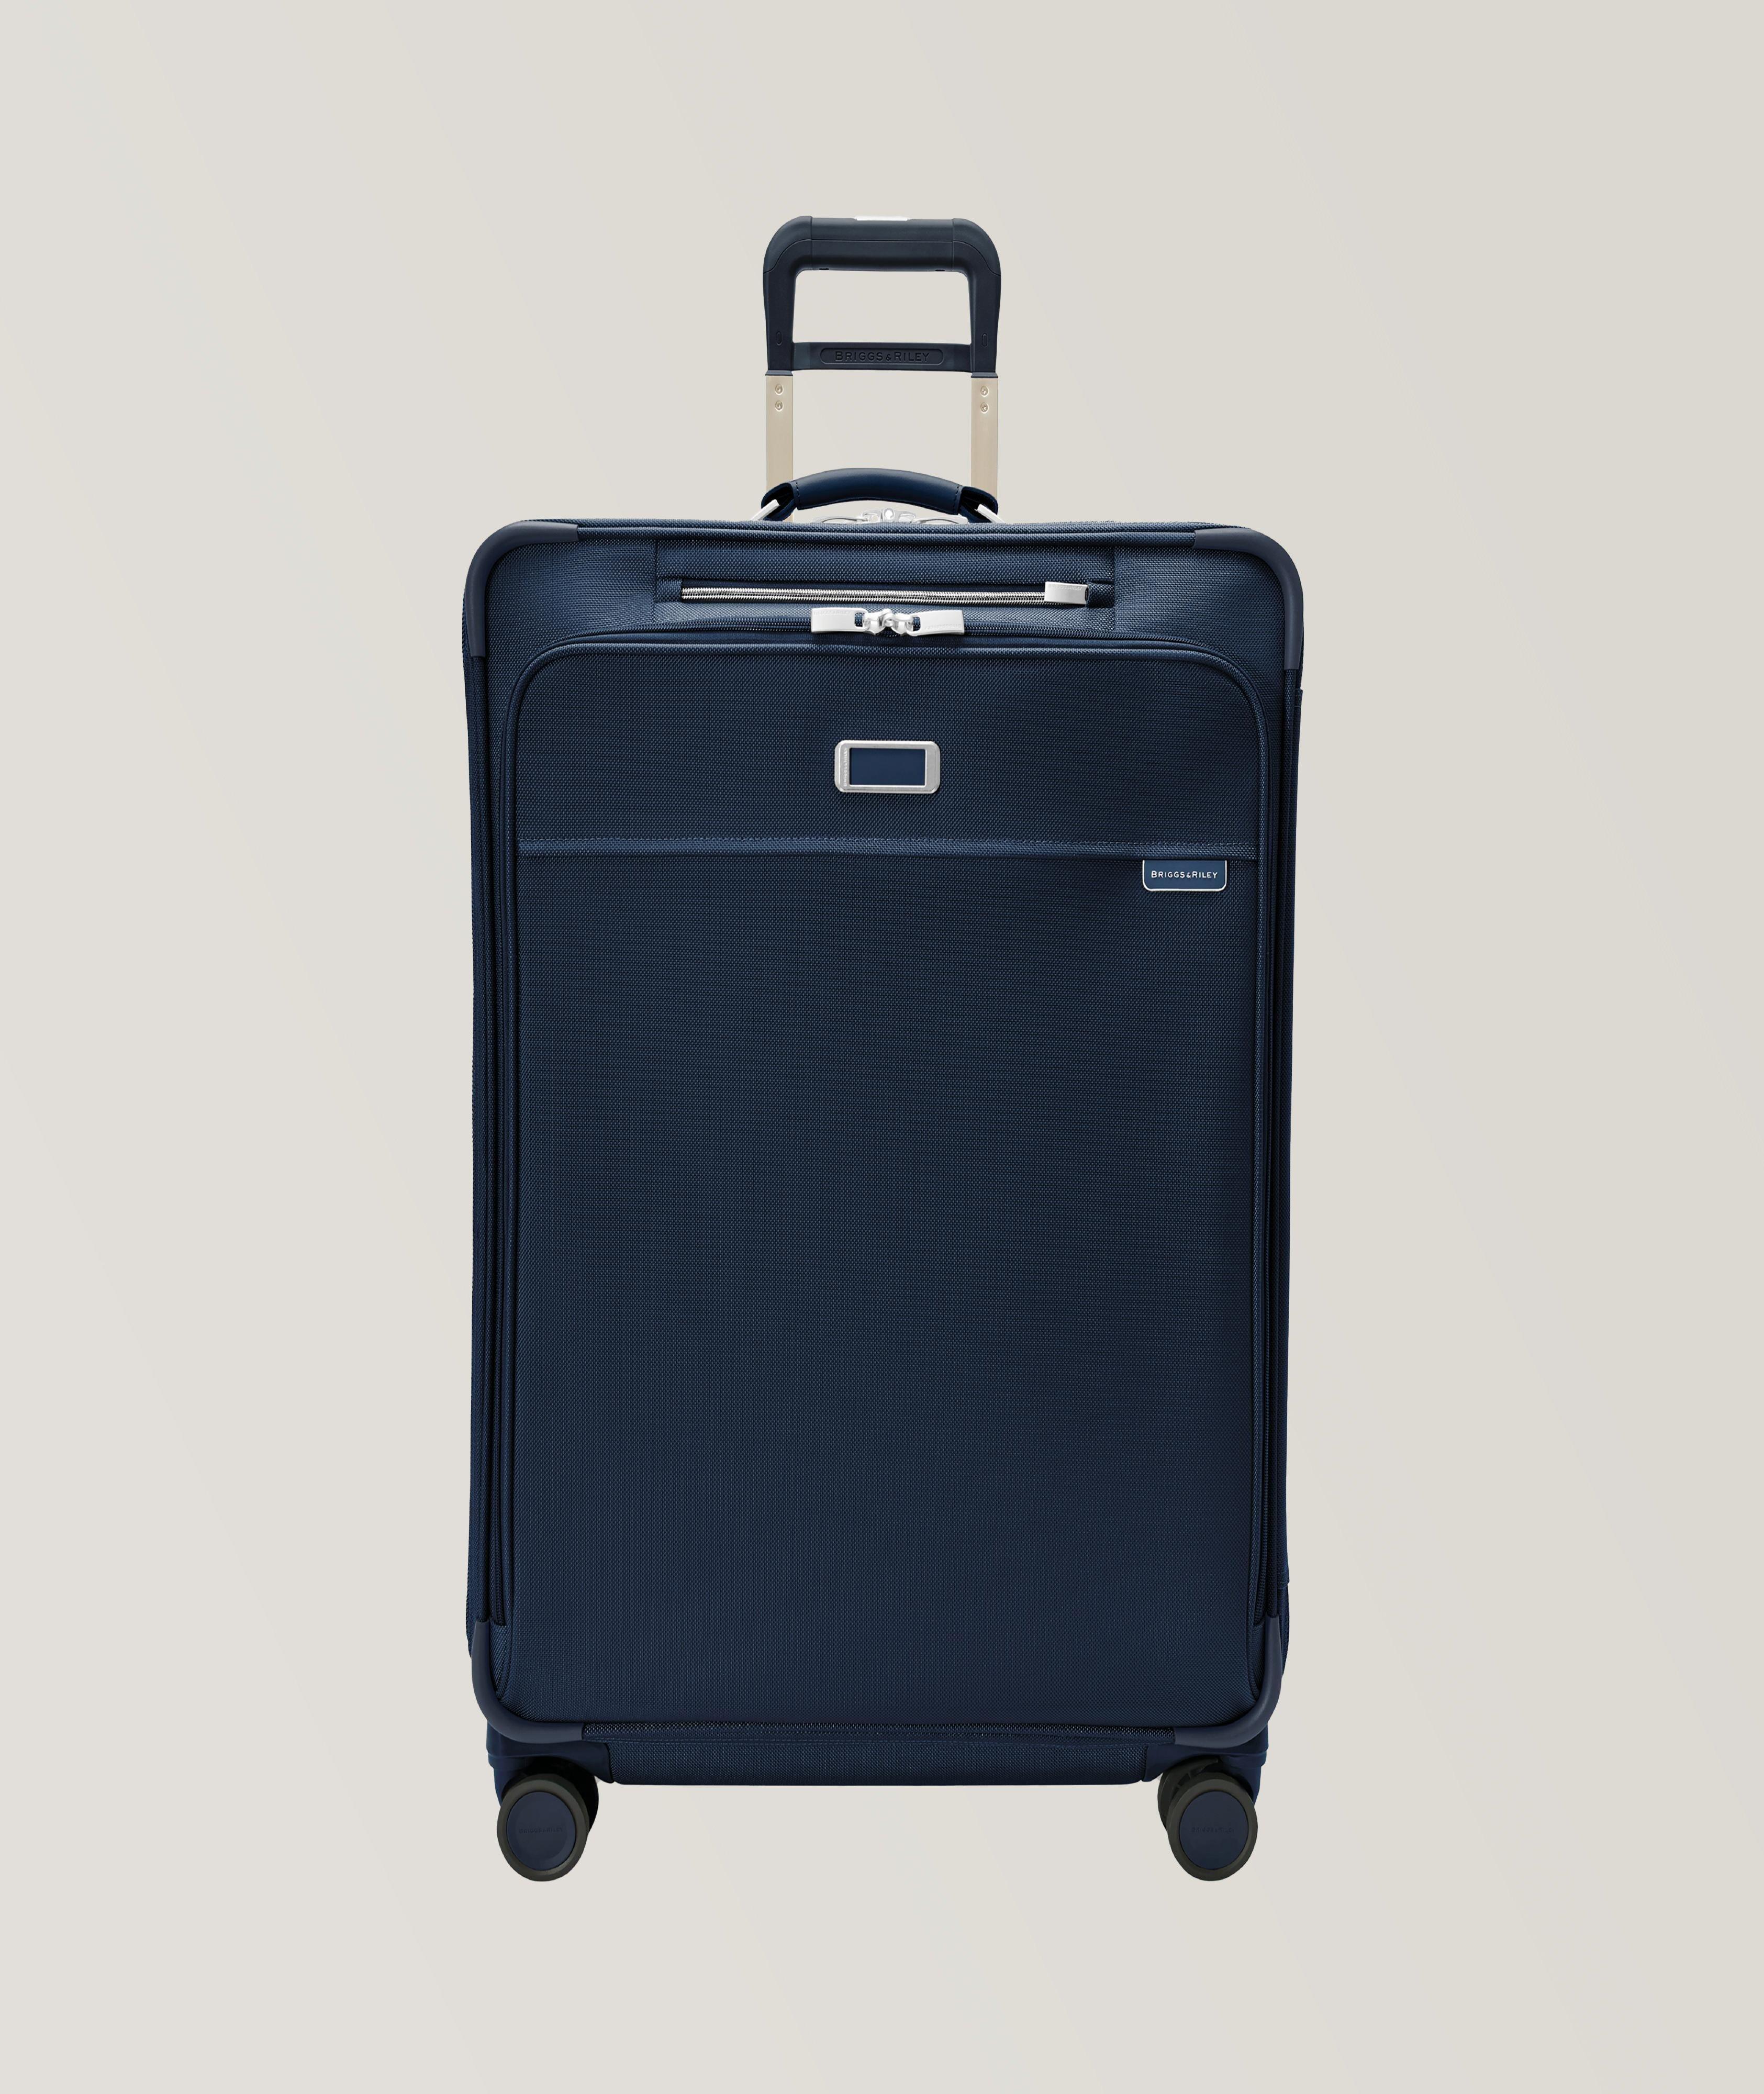 Baseline Collection Large Expandable Spinner Case image 0